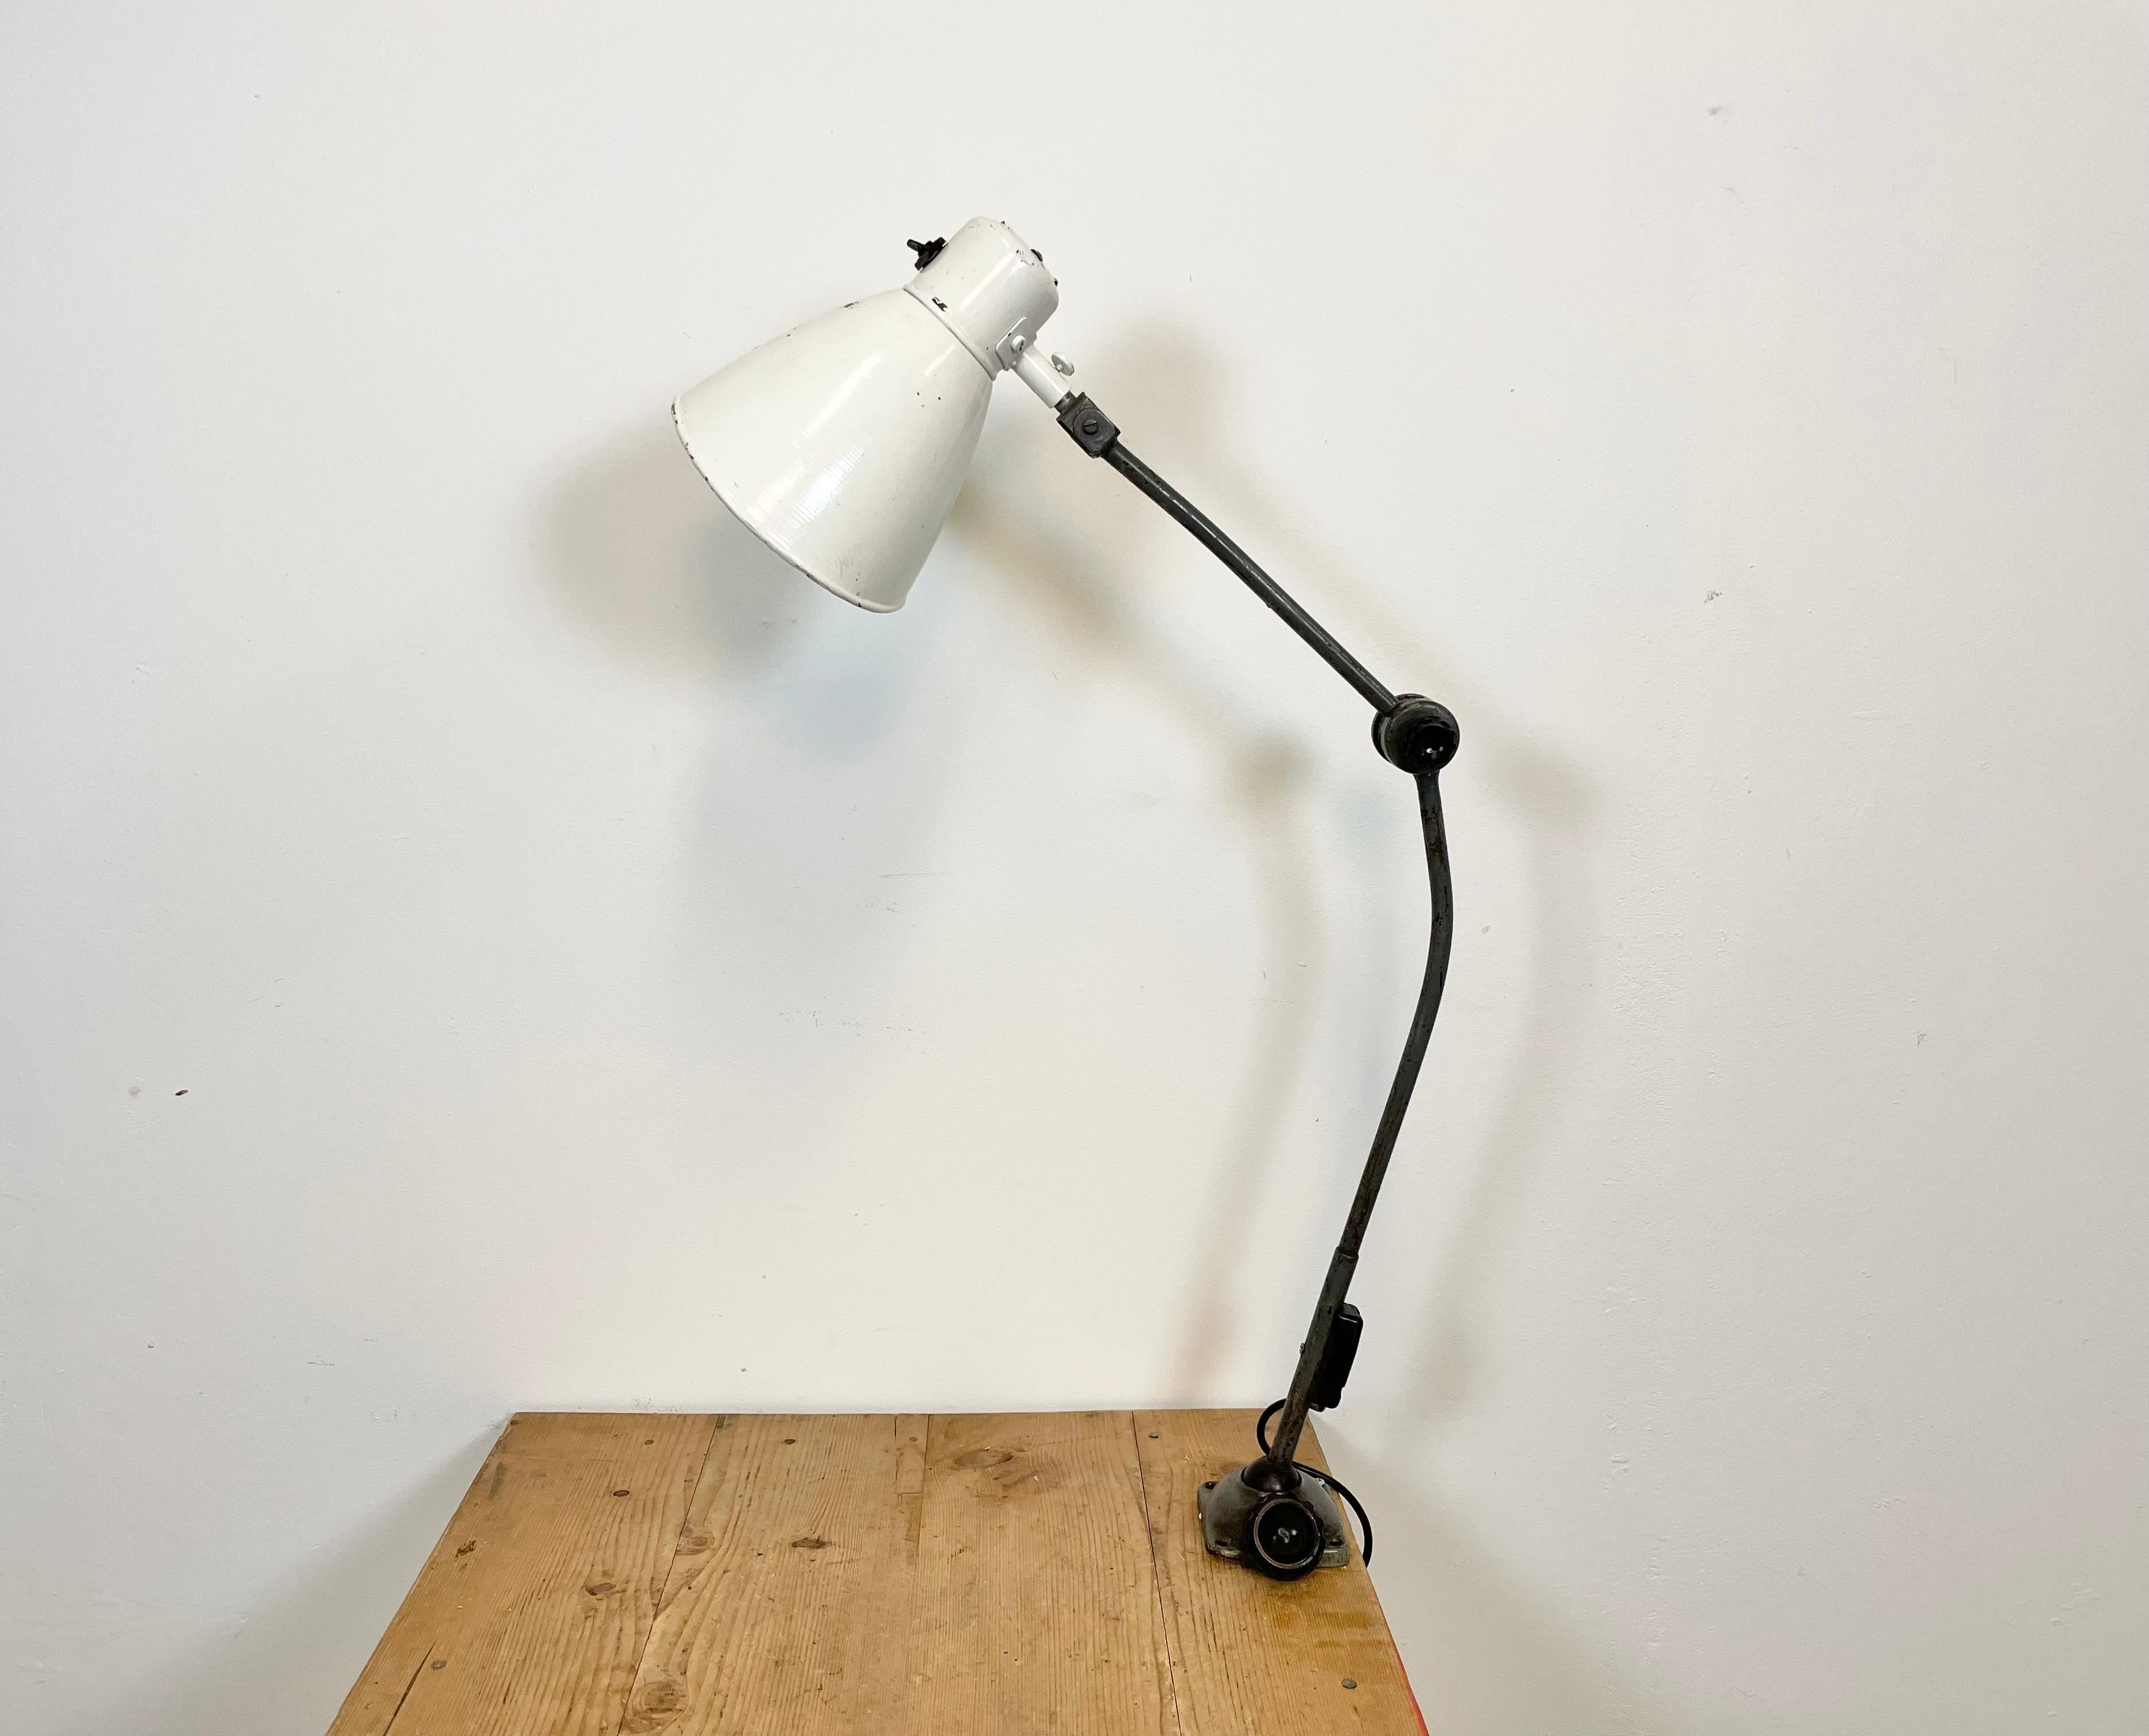 Large industrial table lamp with three adjustable joints made in former Czechoslovalia during the 1960s.It features grey iron base and arm and white lampshade with original switch. The porcelain socket requires E 27/E 26 light bulbs. New wire. The